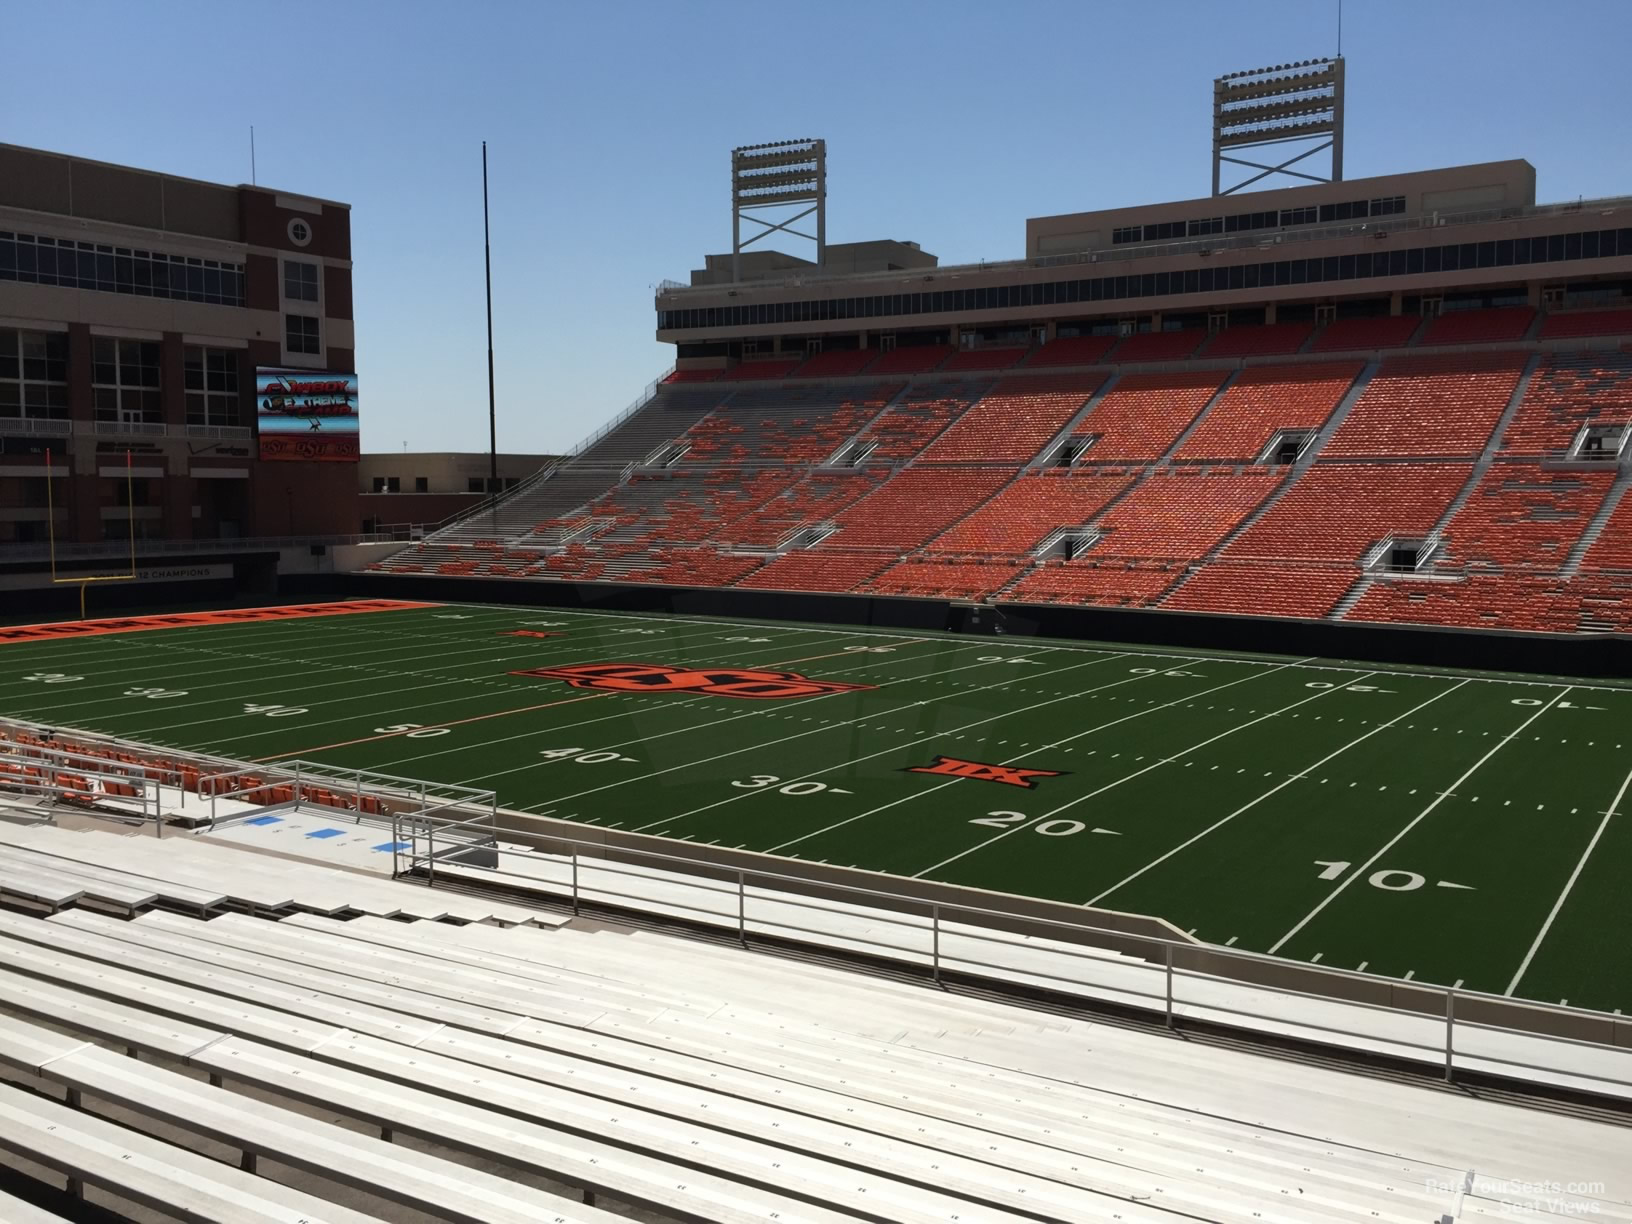 section 223, row 20 seat view  - boone pickens stadium